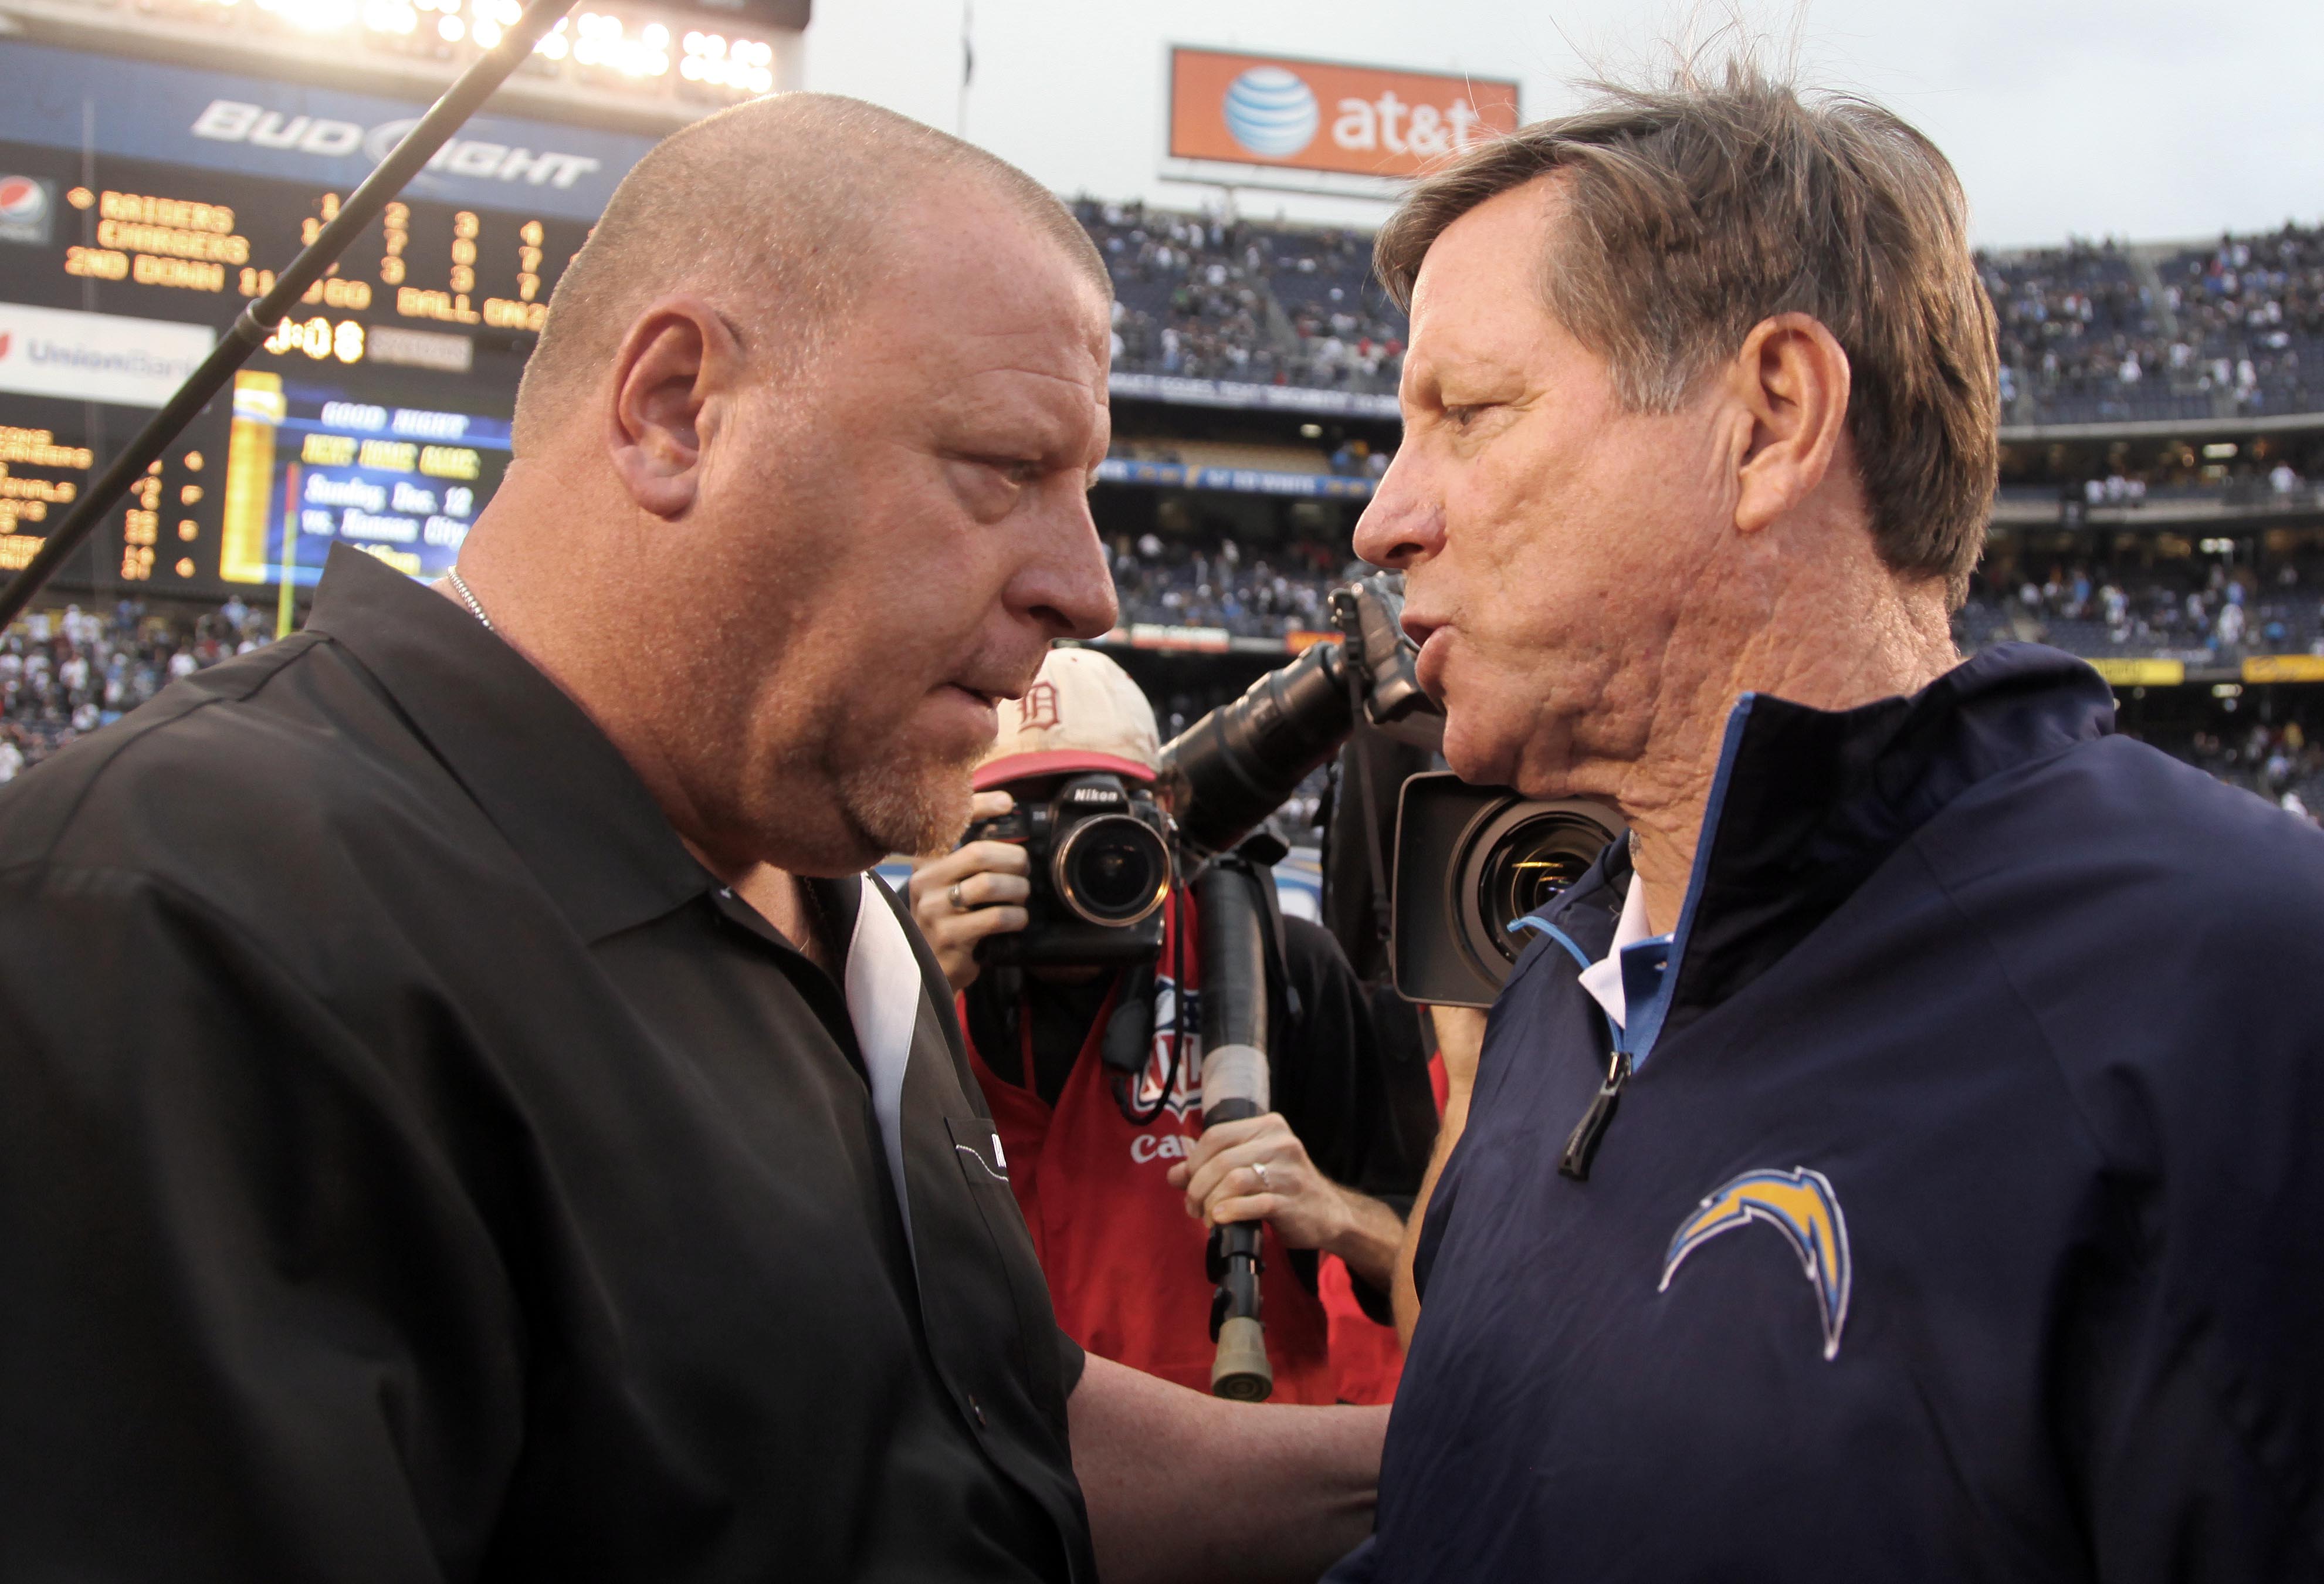 SAN DIEGO, CA - DECEMBER 5: Head Coach Tom Cable of the Oakland Raiders shakes the hand of Head Coach Norv Turner of the San Diego Chargers after the Raiders 24-13 victory during their NFL game at Qualcomm Stadium on December 5, 2010 in San Diego, Califor